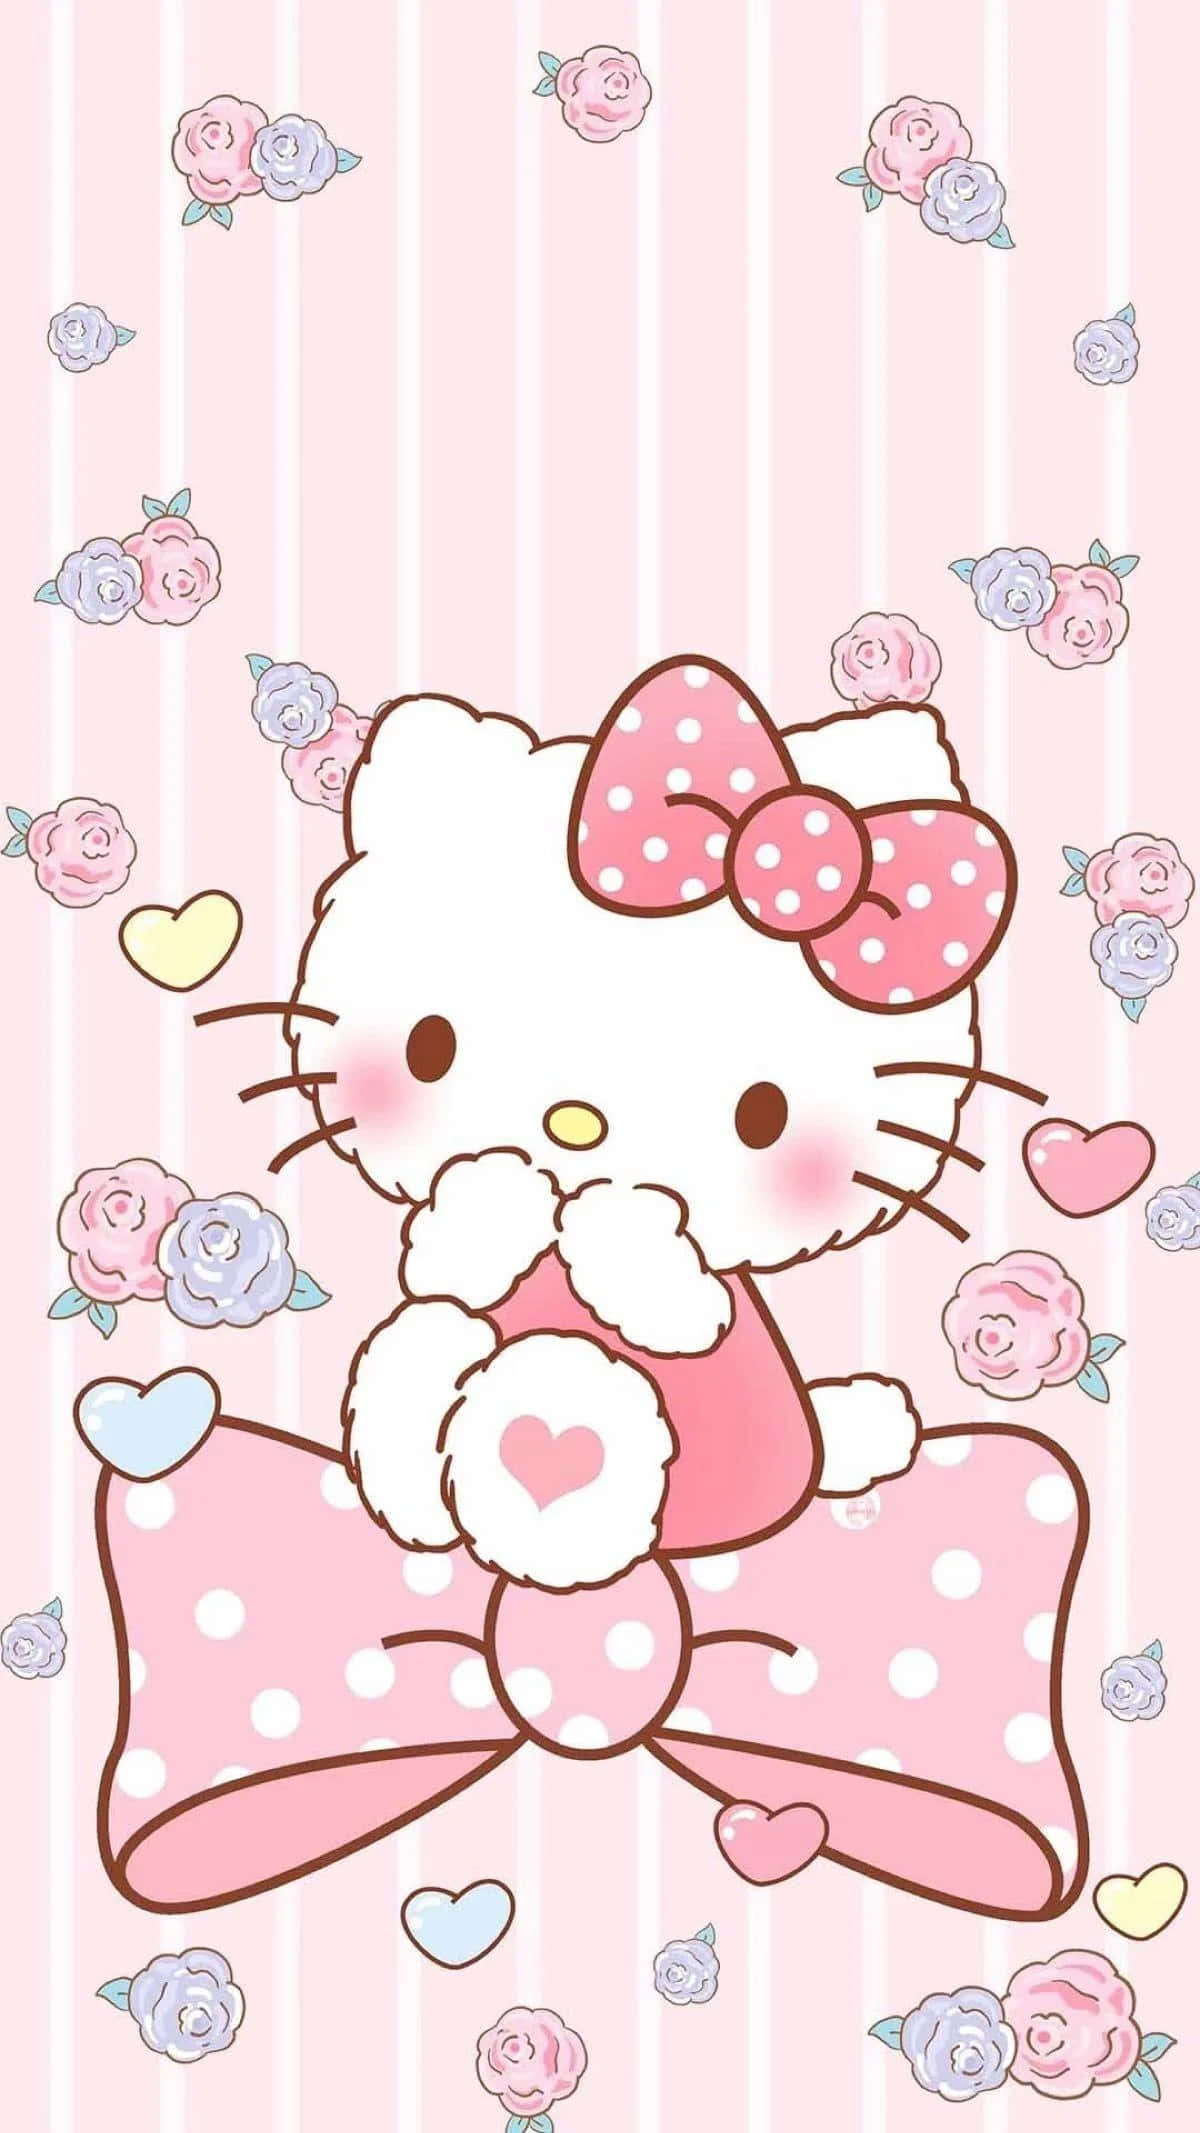 Download Hello Kitty Wallpapers - Wallpapers For Pc | Wallpapers.com